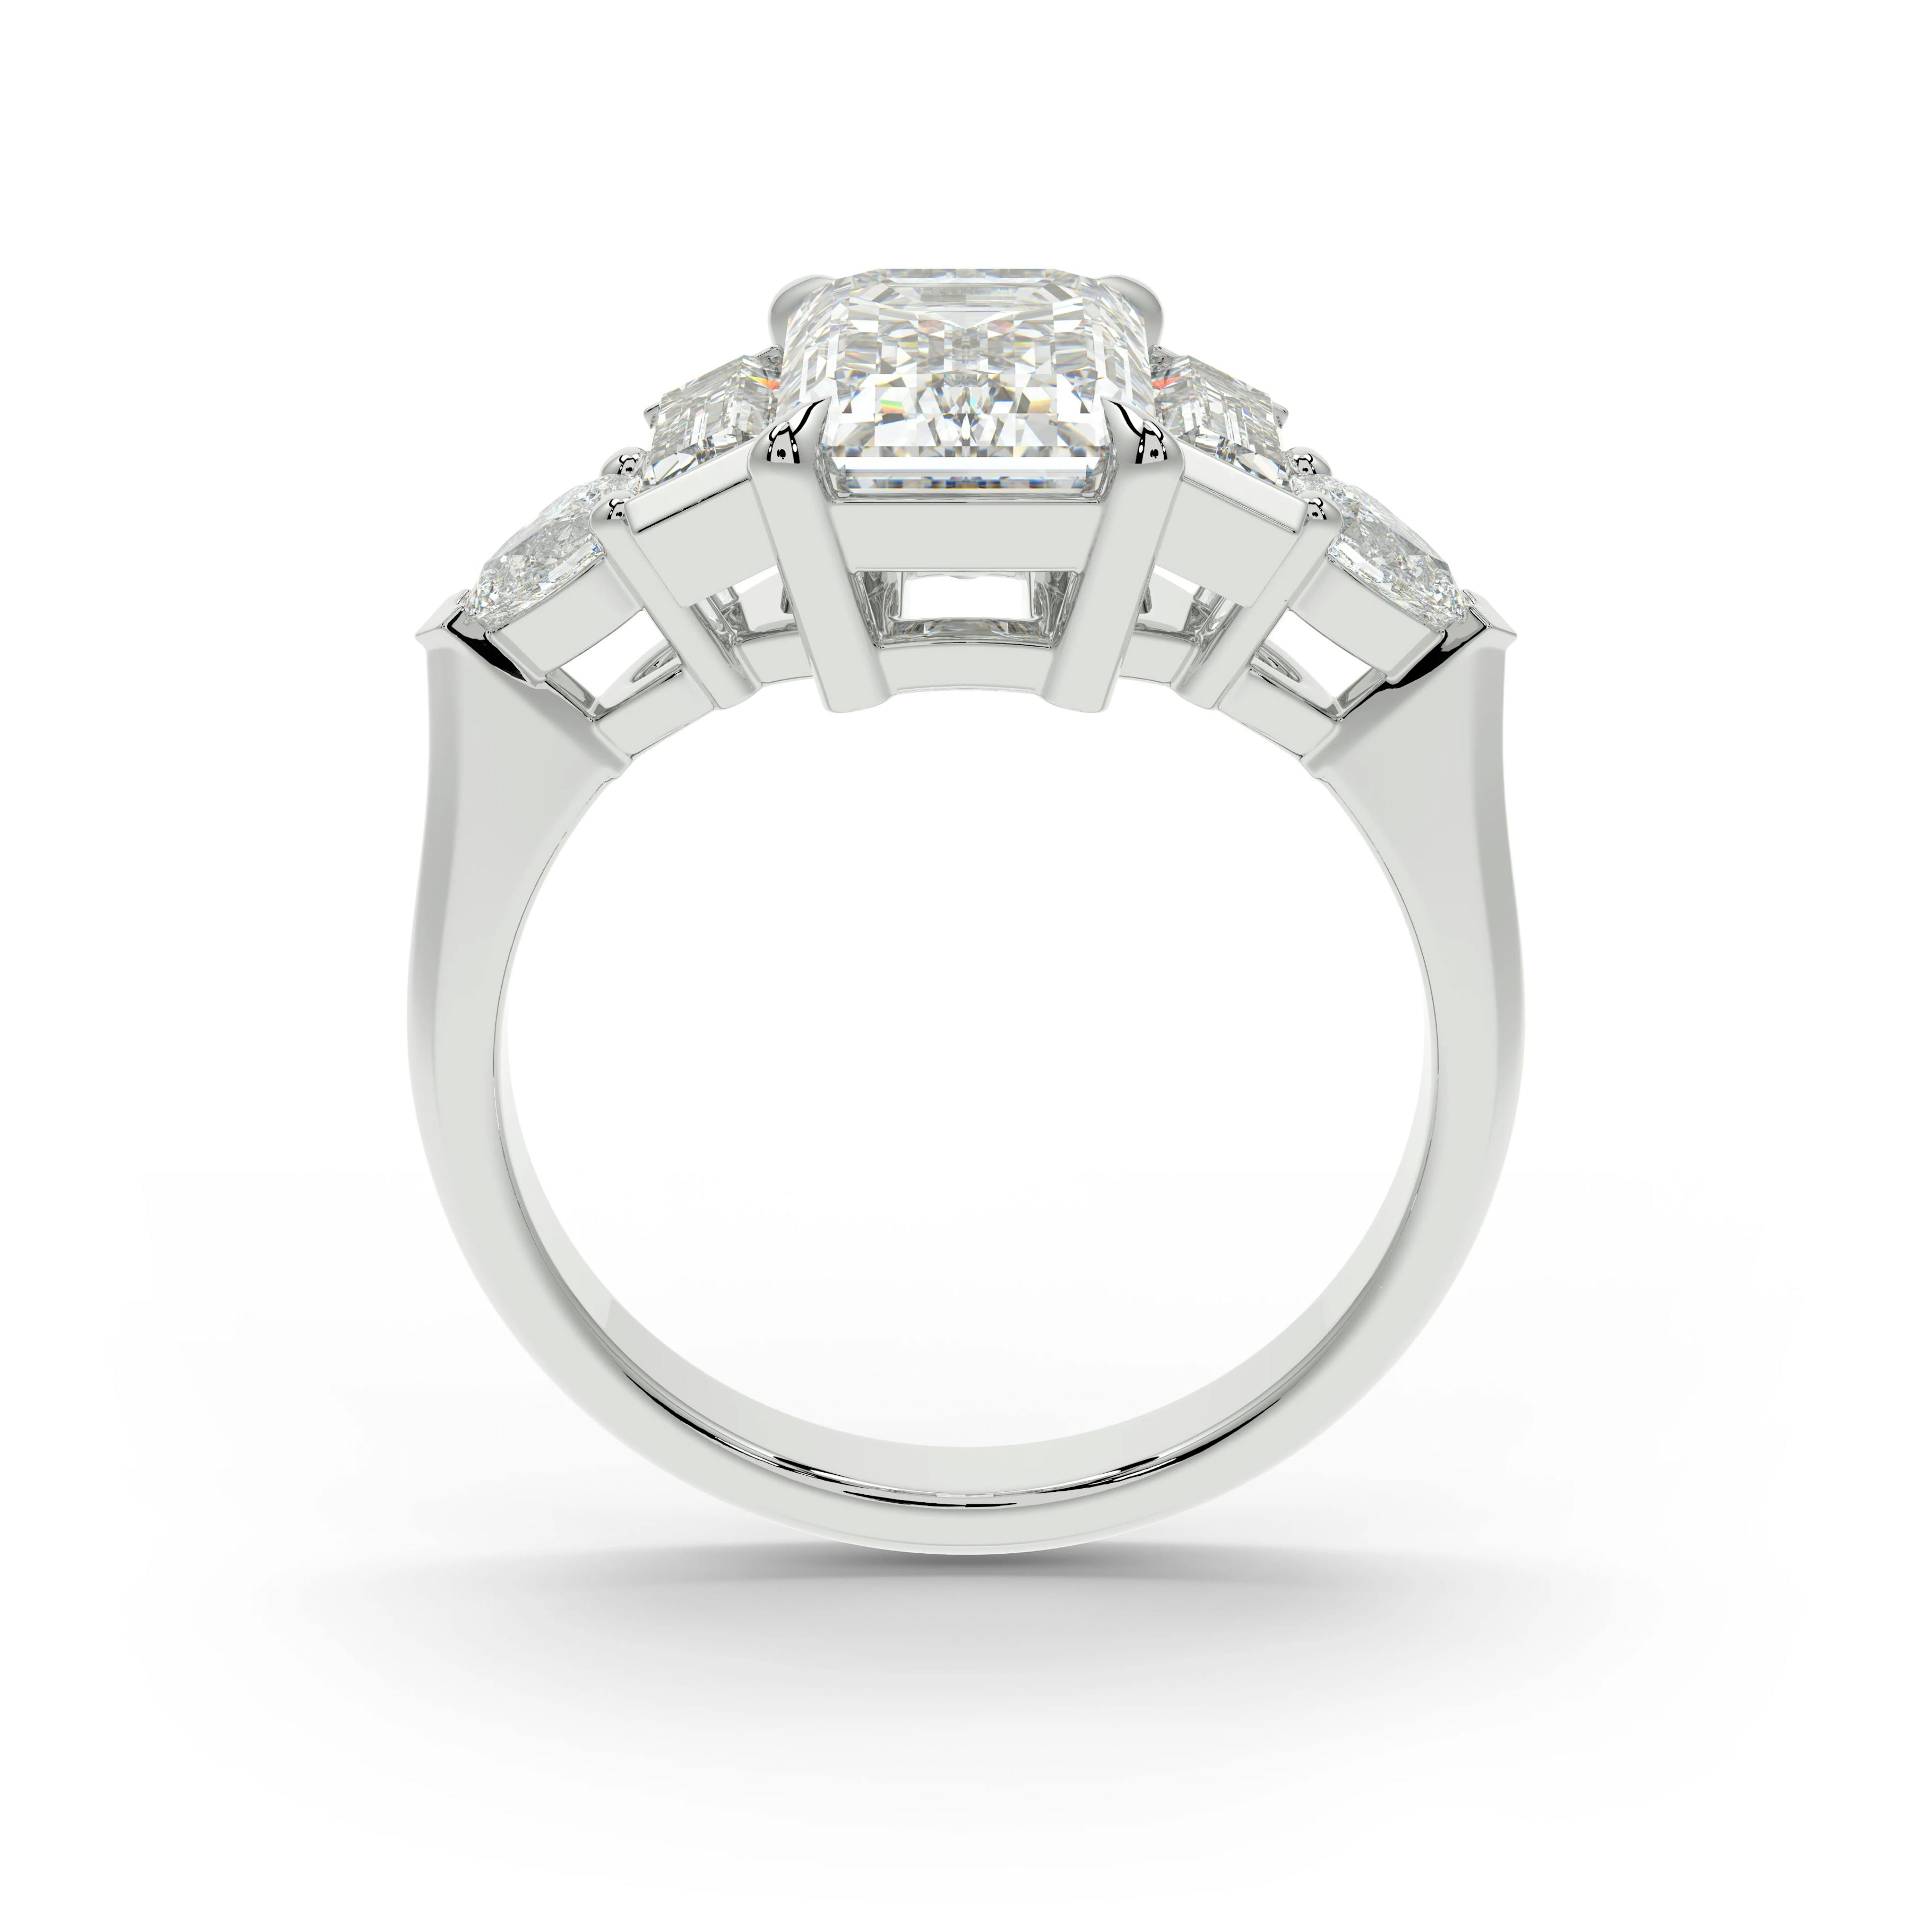 Rendered image of a 5 stone diamond ring in White Gold